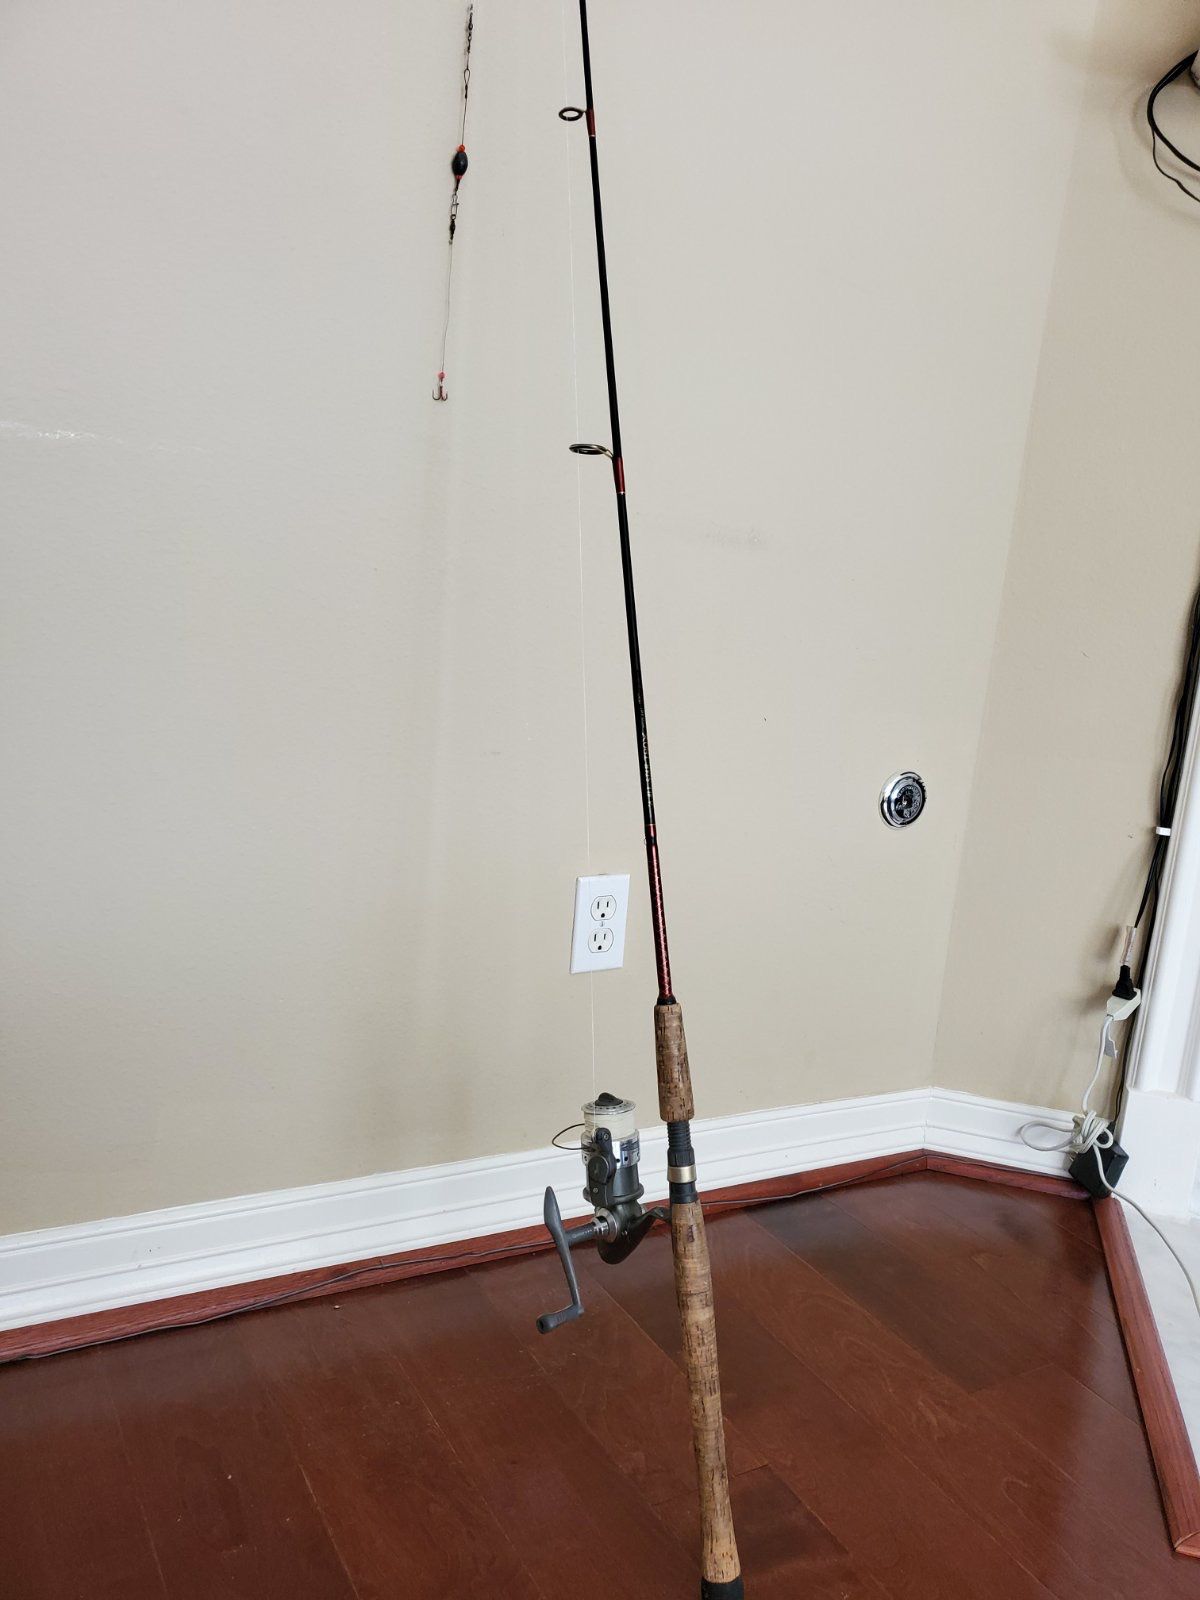 All Star T80X Fishing Rod for Sale in Houston, TX - OfferUp